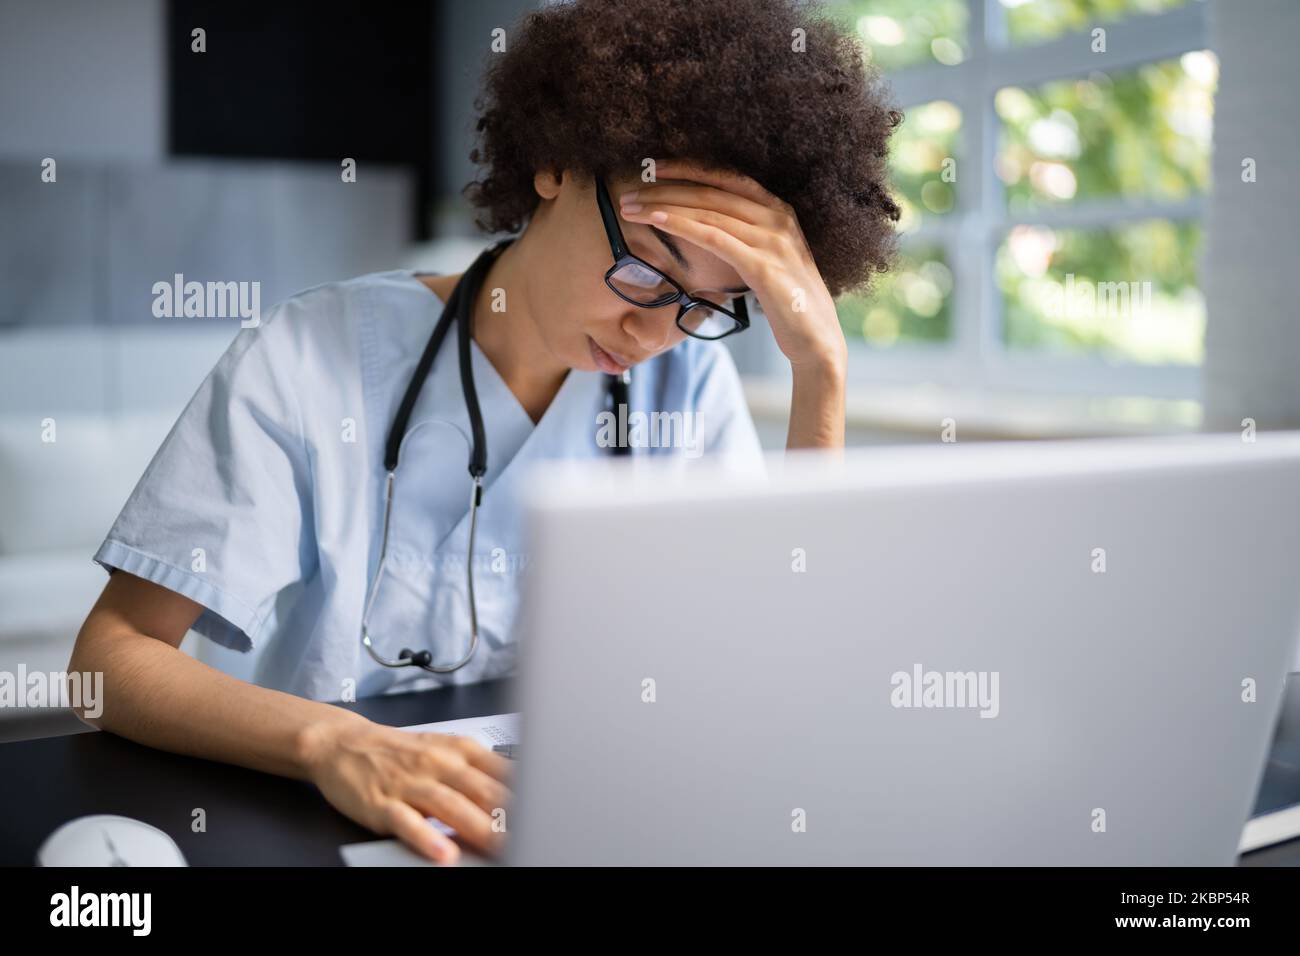 Frustrated Overworked Doctor In Hospital Looking At Computer Stock Photo